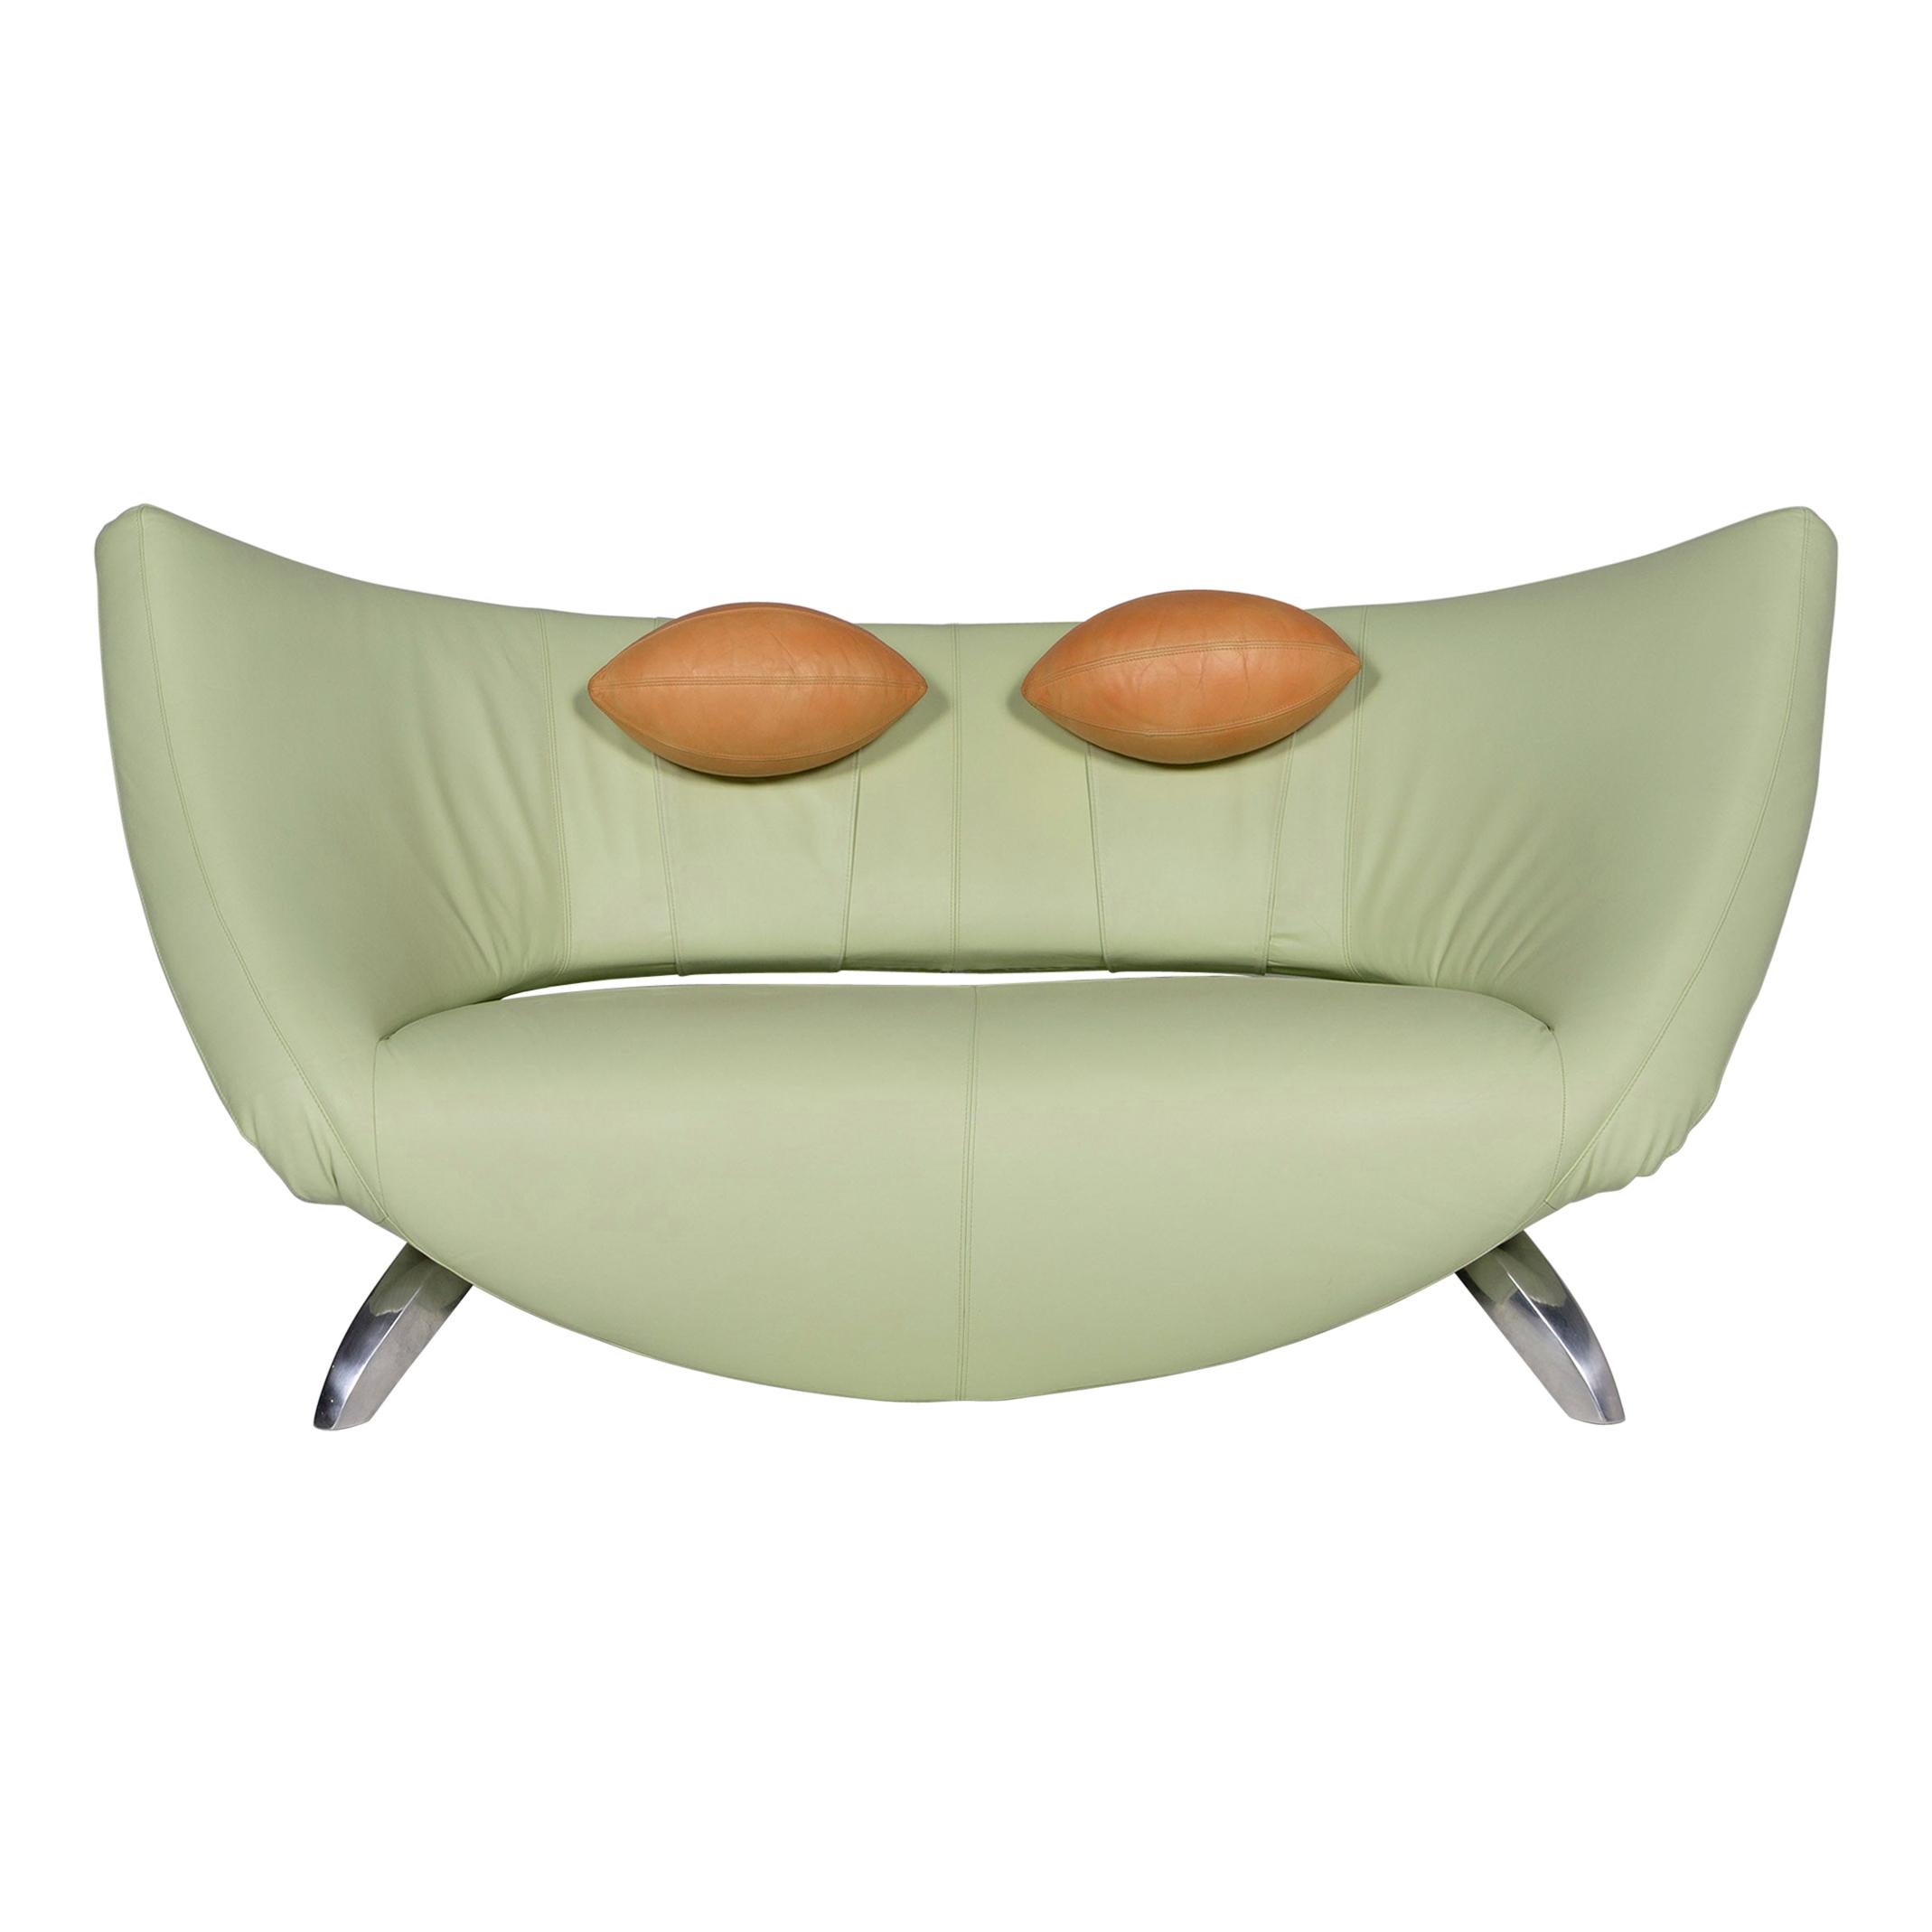 Leolux Danaide Leather Sofa Green Pistachio Green Electric Function Couch